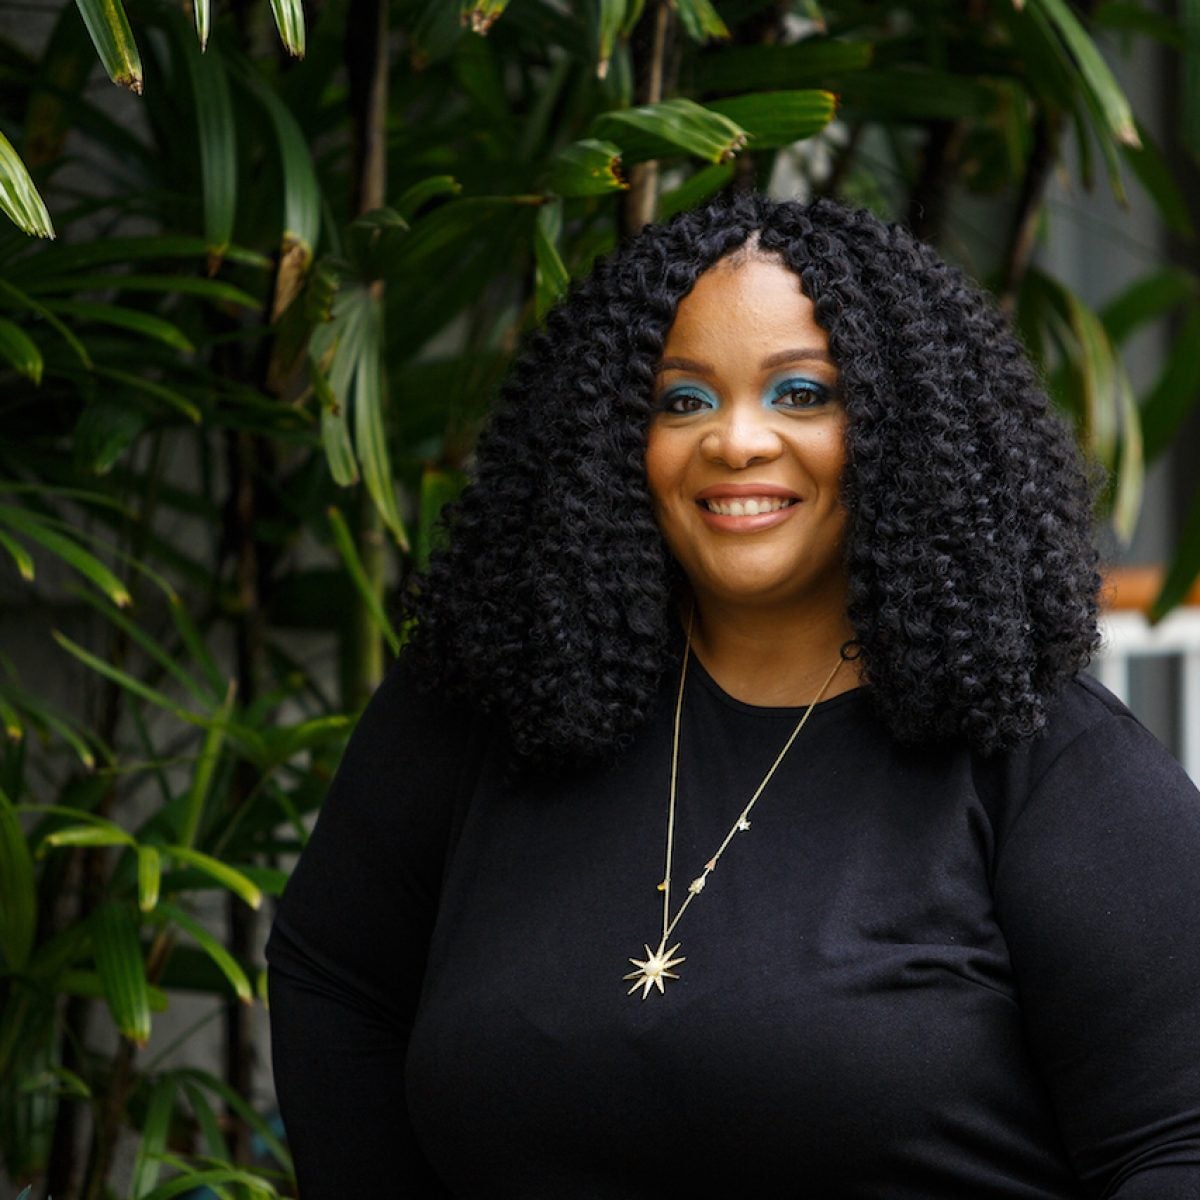 Serena Williams, Female Founders Fund Place Their Bets On This Black Woman Tech Founder With $1.6 Million Investment